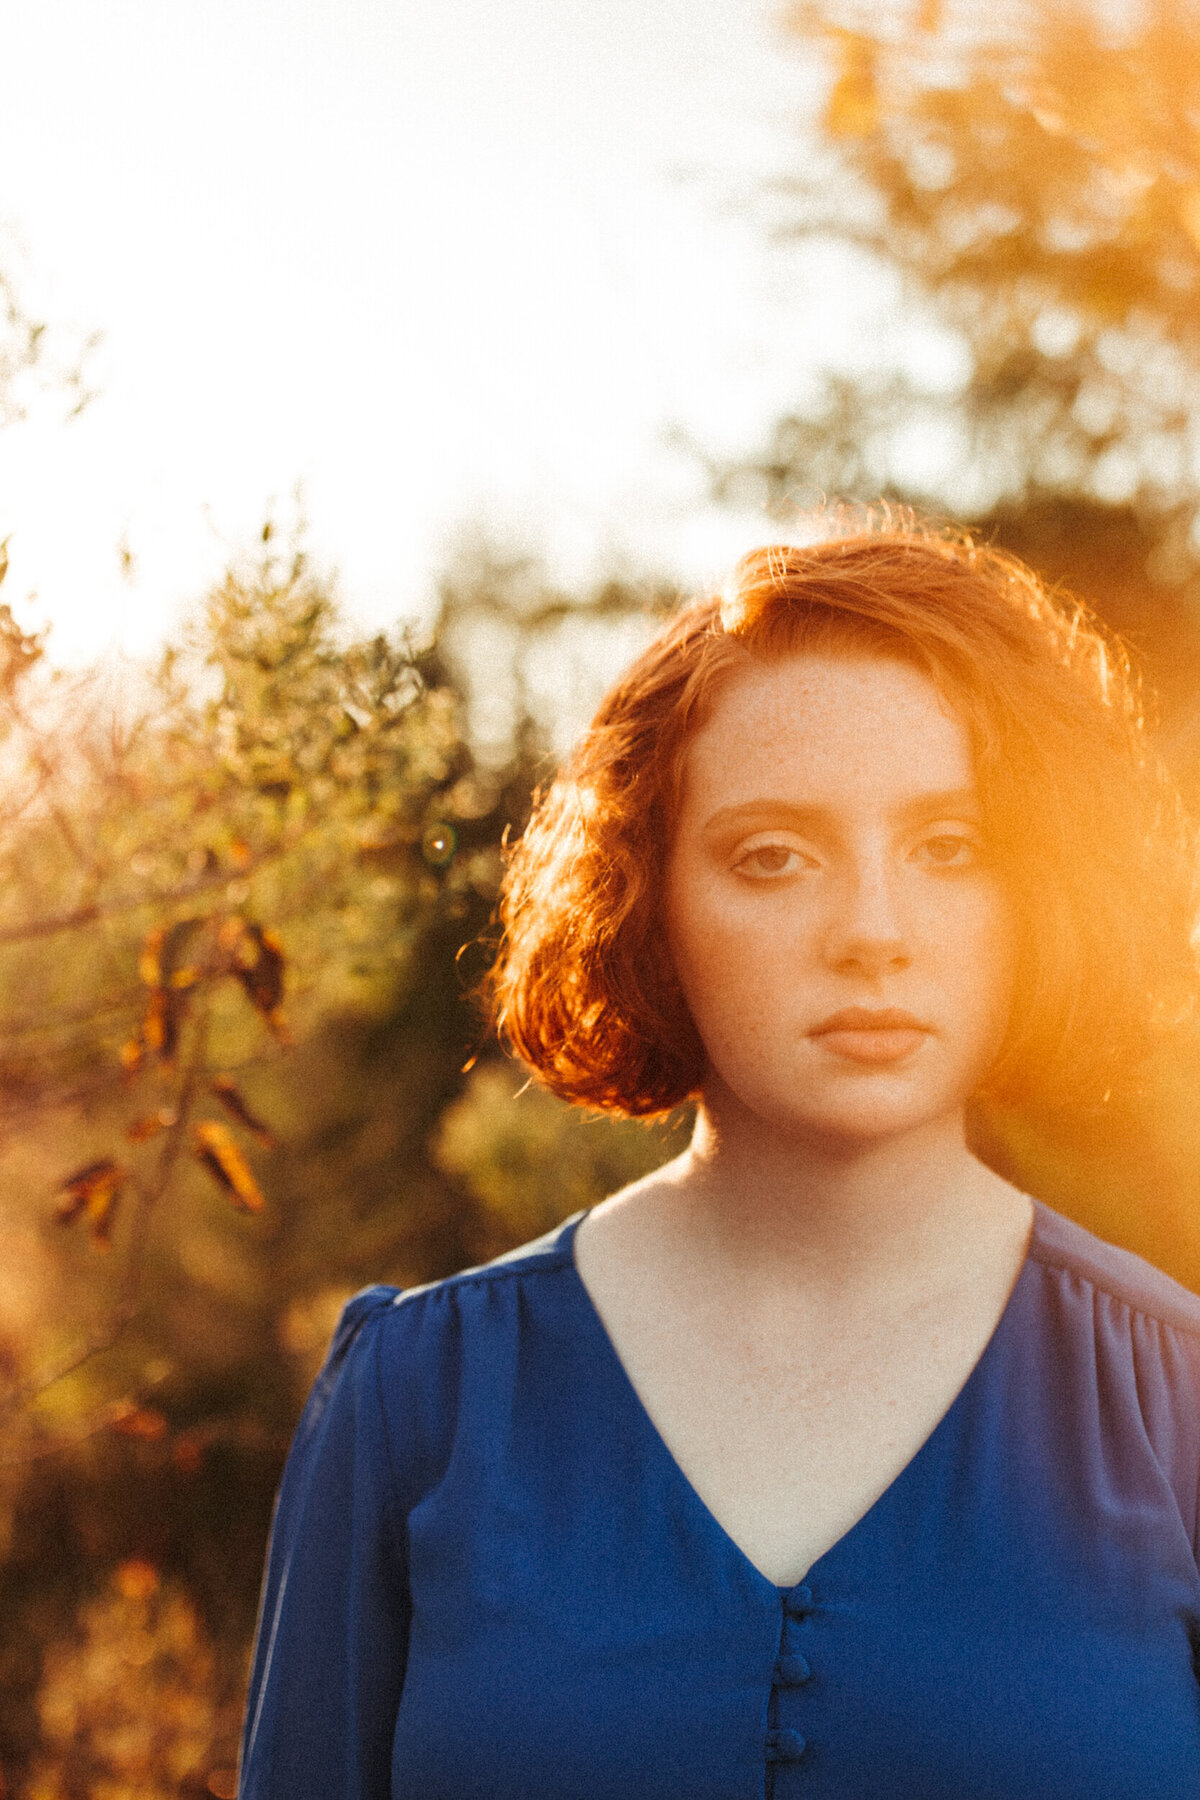 High school senior girl with short red hair and blue dress making a serious face at sunset